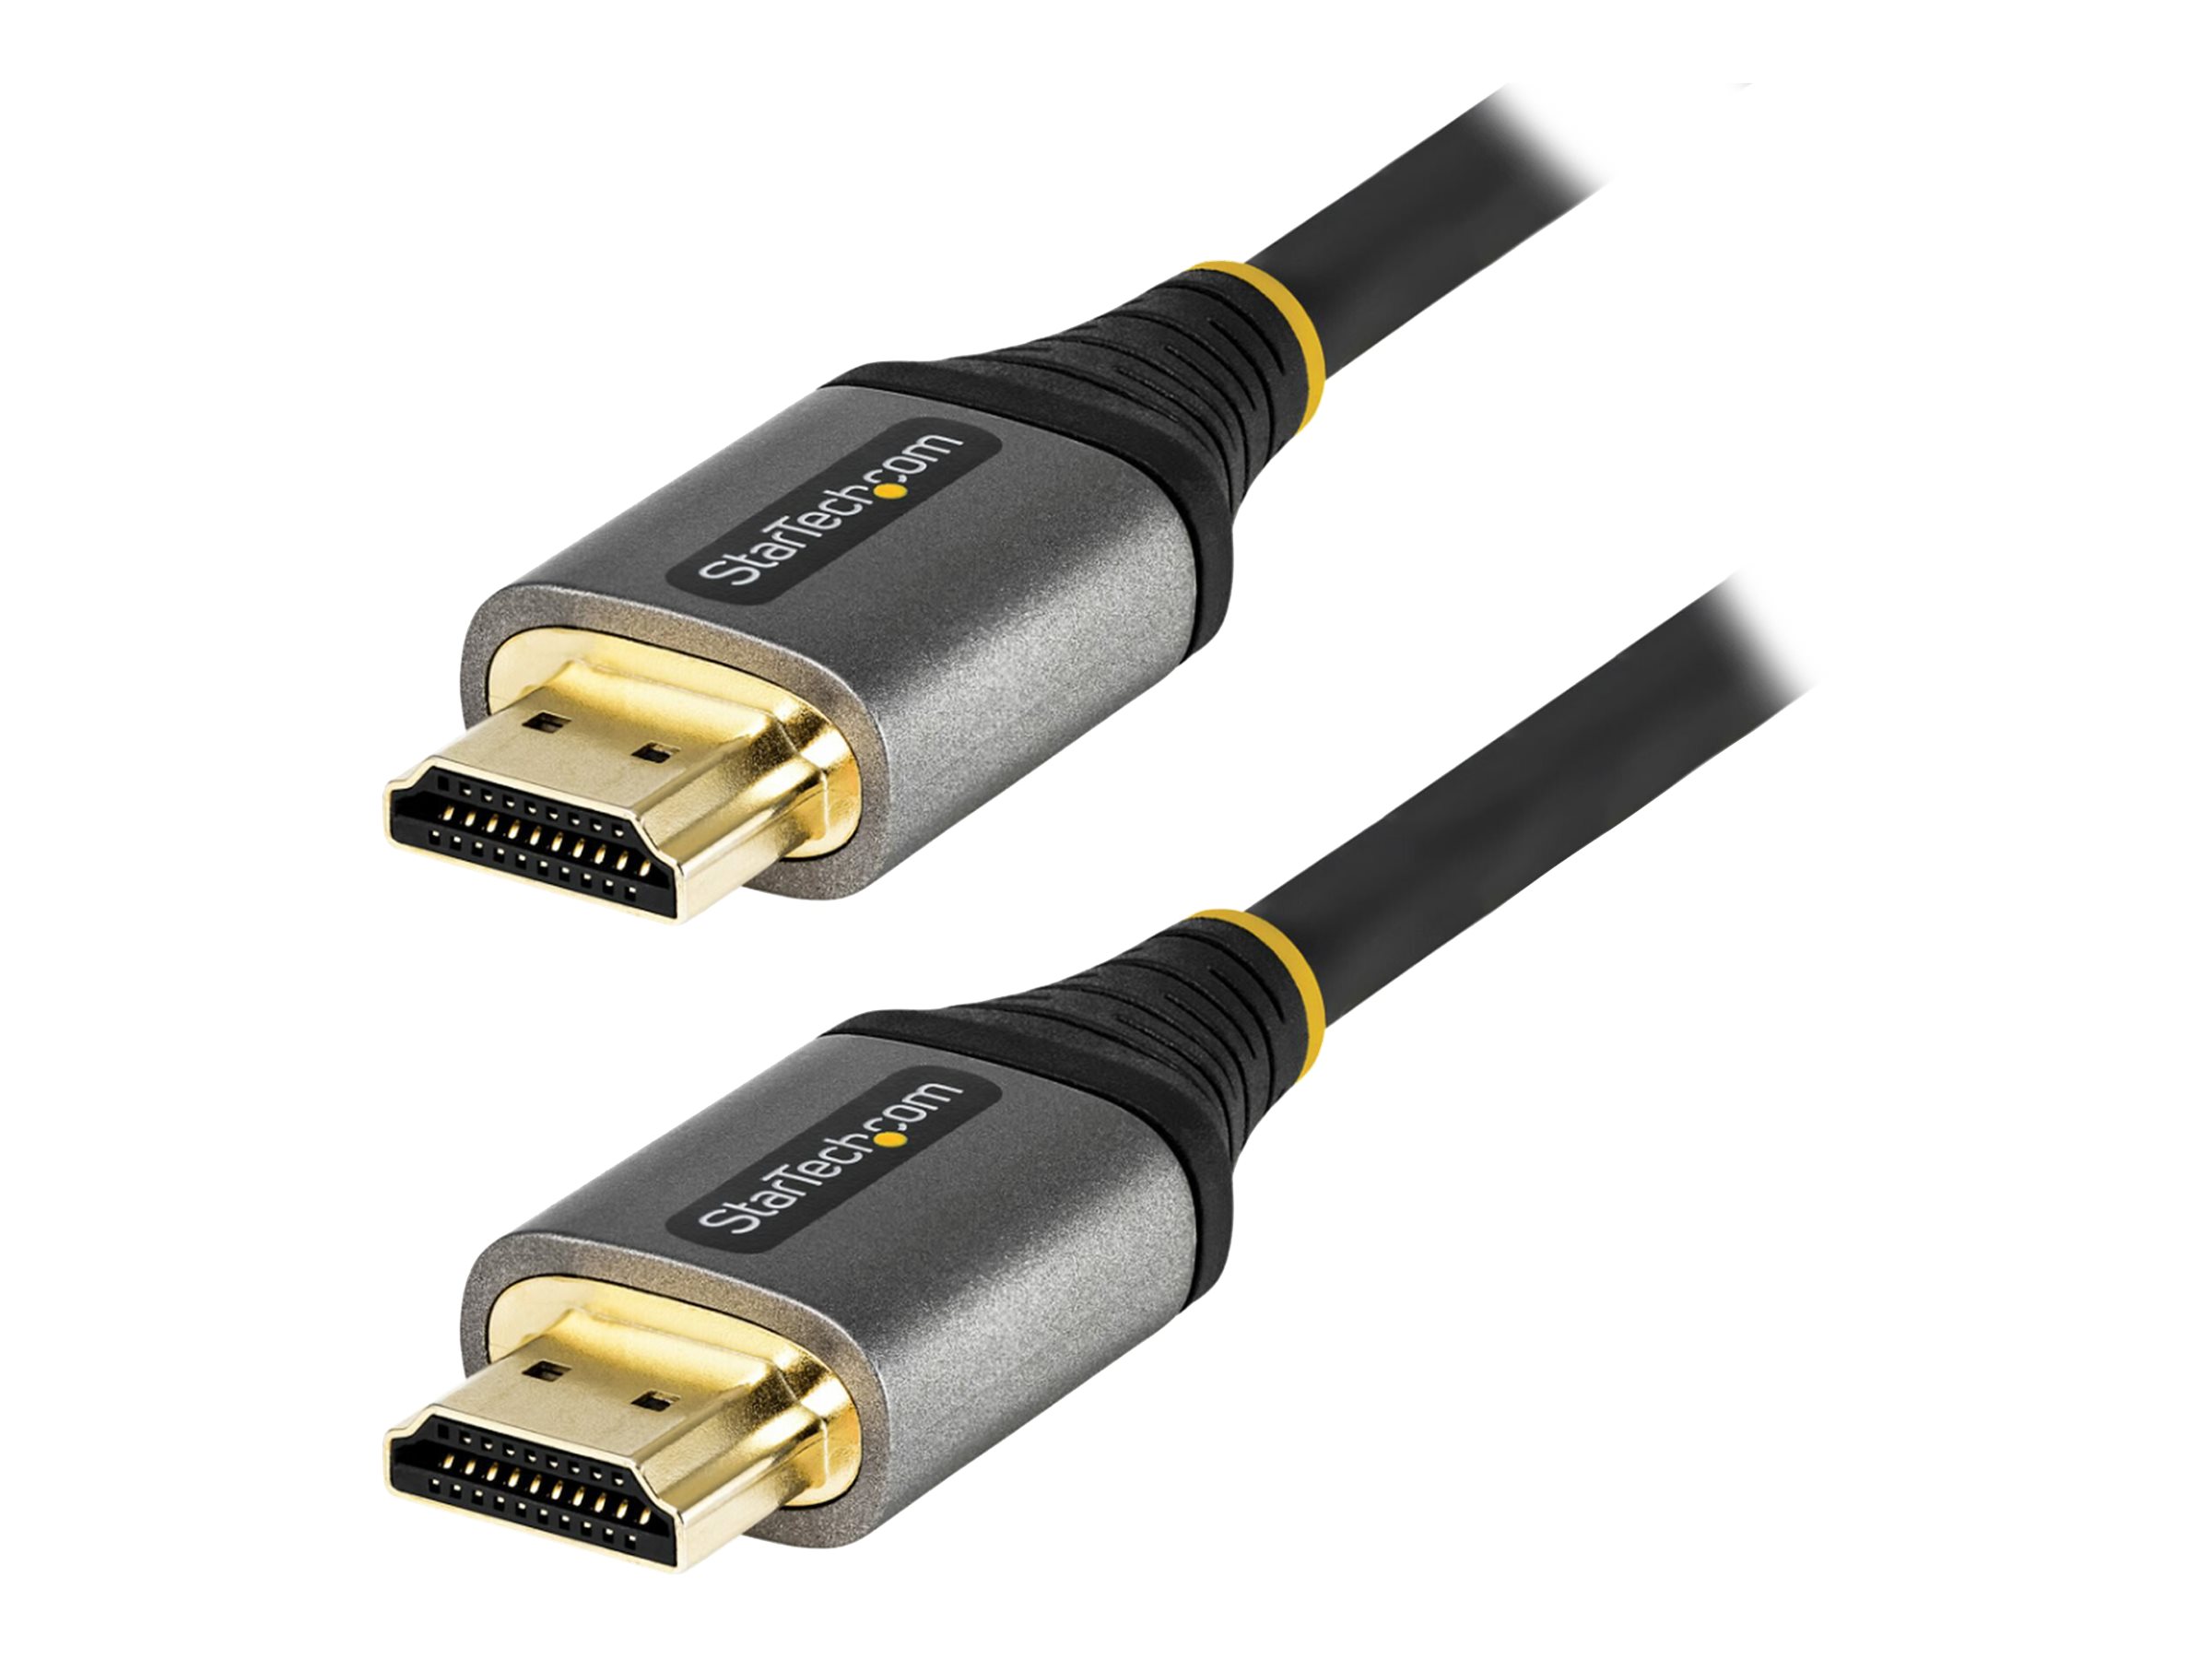 StarTech.com 12ft (4m) HDMI 2.1 Cable, Certified Ultra High Speed HDMI Cable 48Gbps, 8K 60Hz/4K 120Hz HDR10+ eARC, Ultra HD 8K HDMI Cable/Cord w/TPE Jacket, For UHD Monitor/TV/Display - Dolby Vision/Atmos, DTS-HD (HDMM21V4M) - HDMI-Kabel mit Ethernet - 4